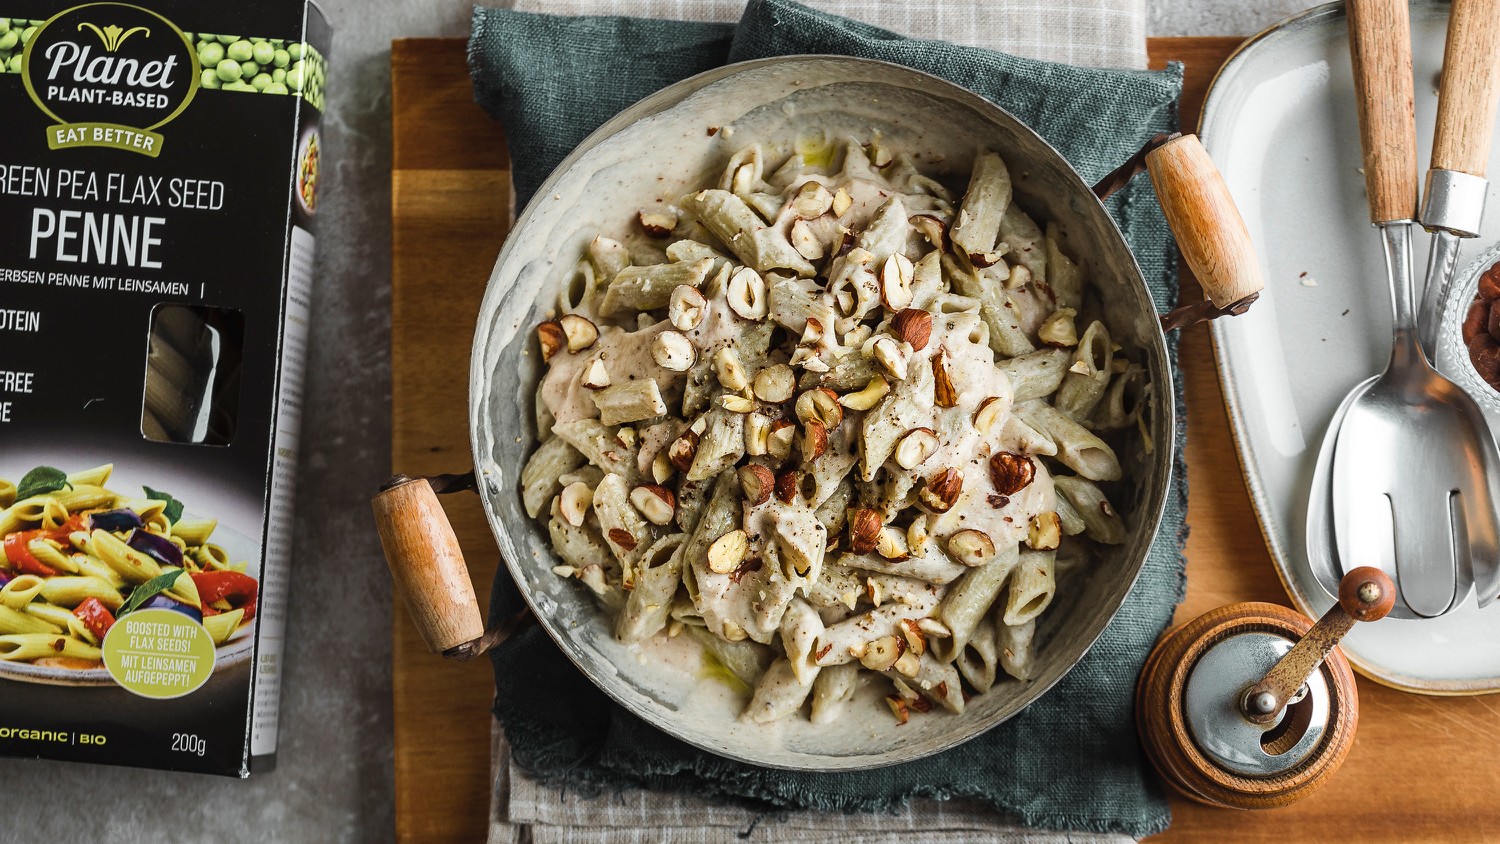 Image of Green Pea Flax Penne with cauliflower white sauce